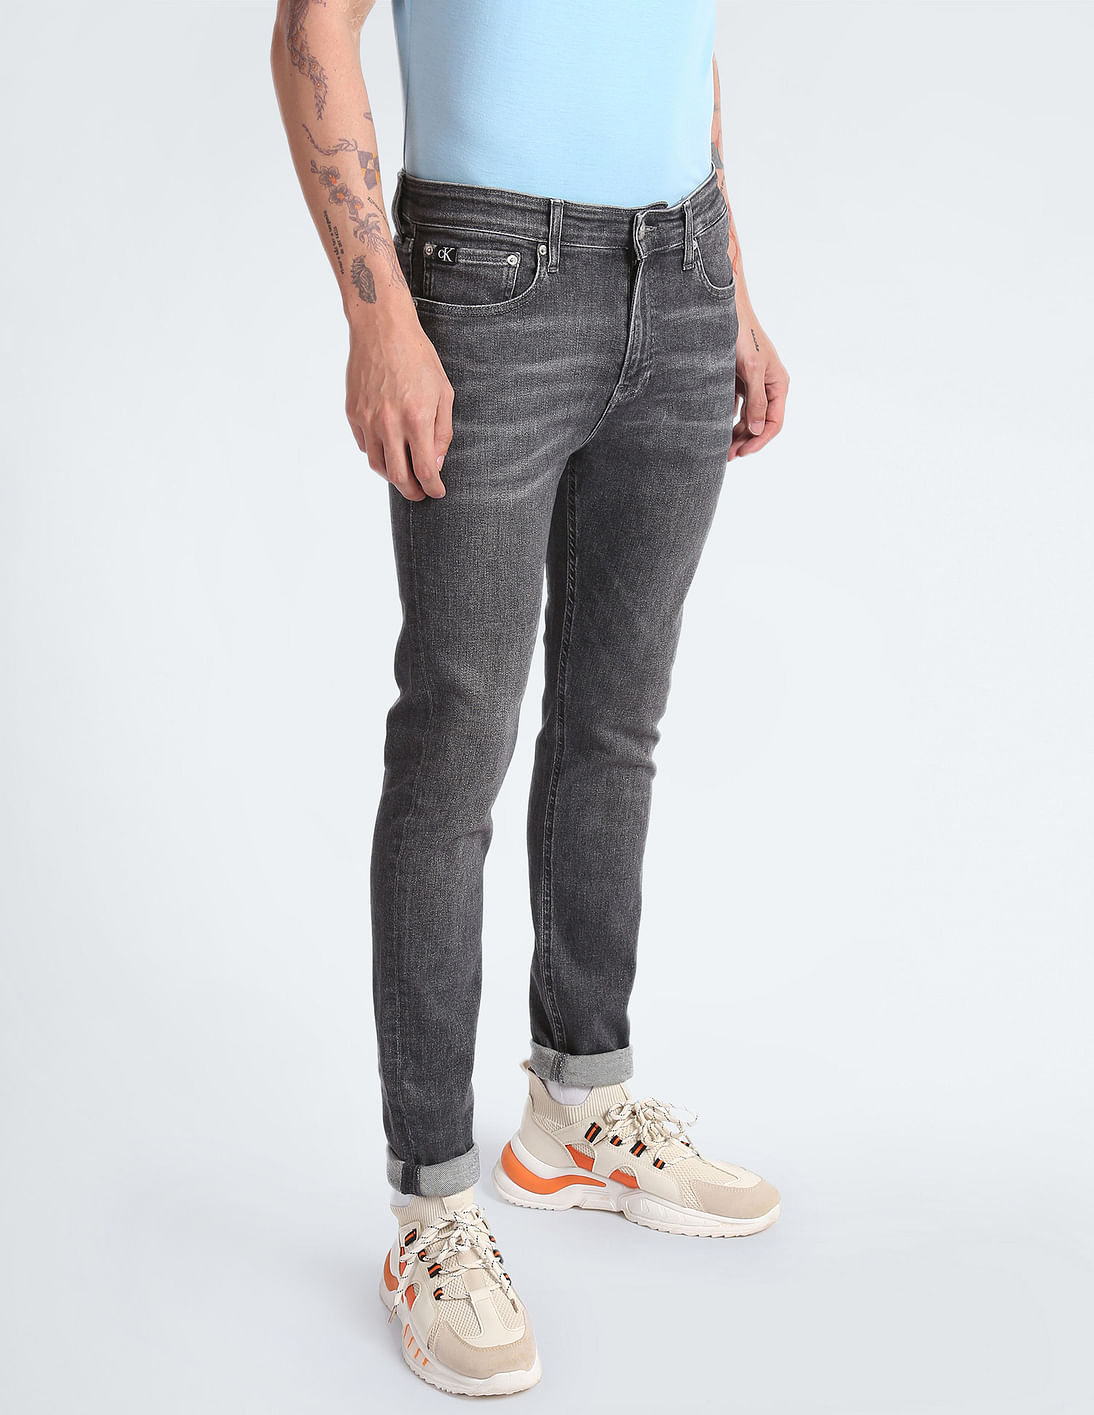 Buy Calvin Klein Recycled Cotton Super Skinny Fit Jeans - NNNOW.com